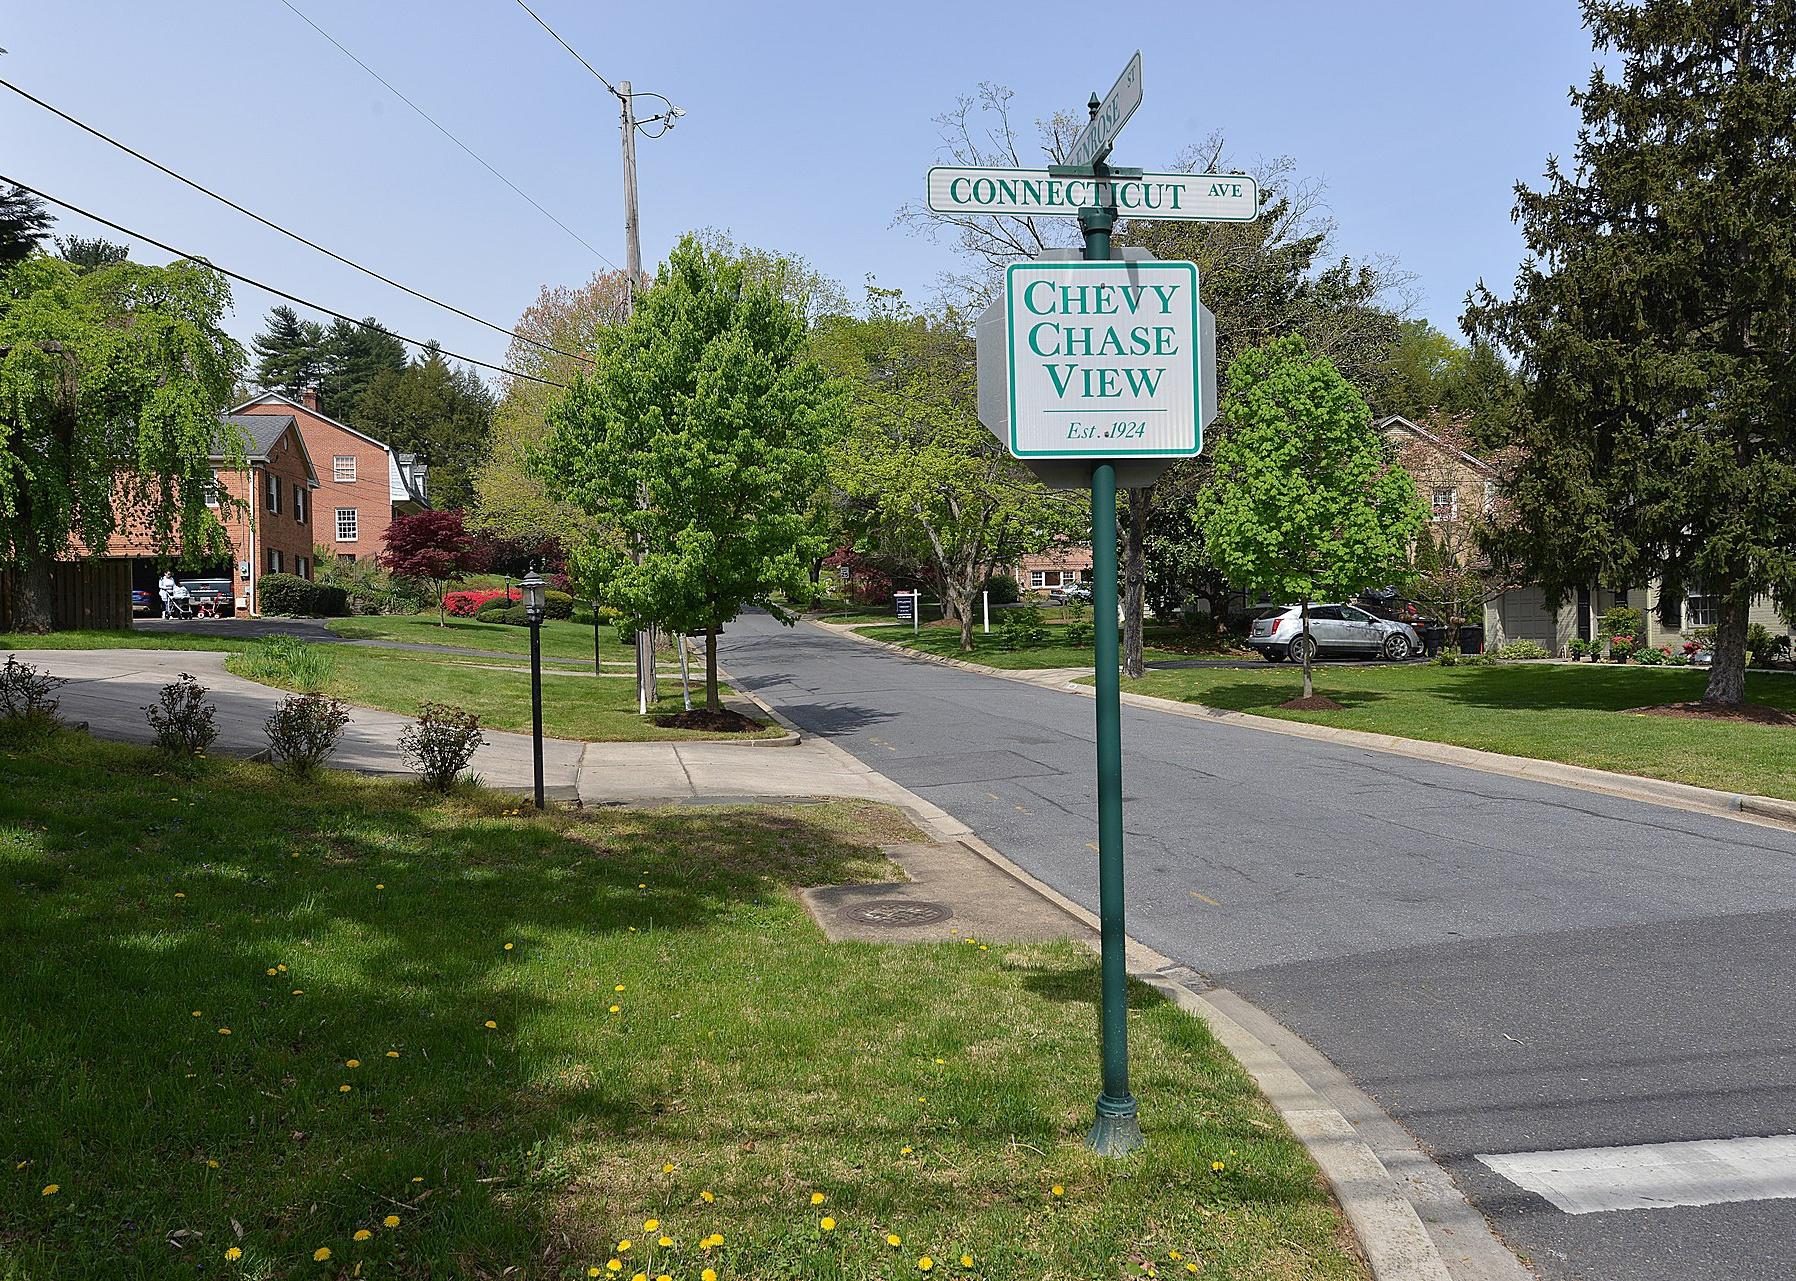 A neighborhood with large homes and a Chevy Chase View entrance sign.